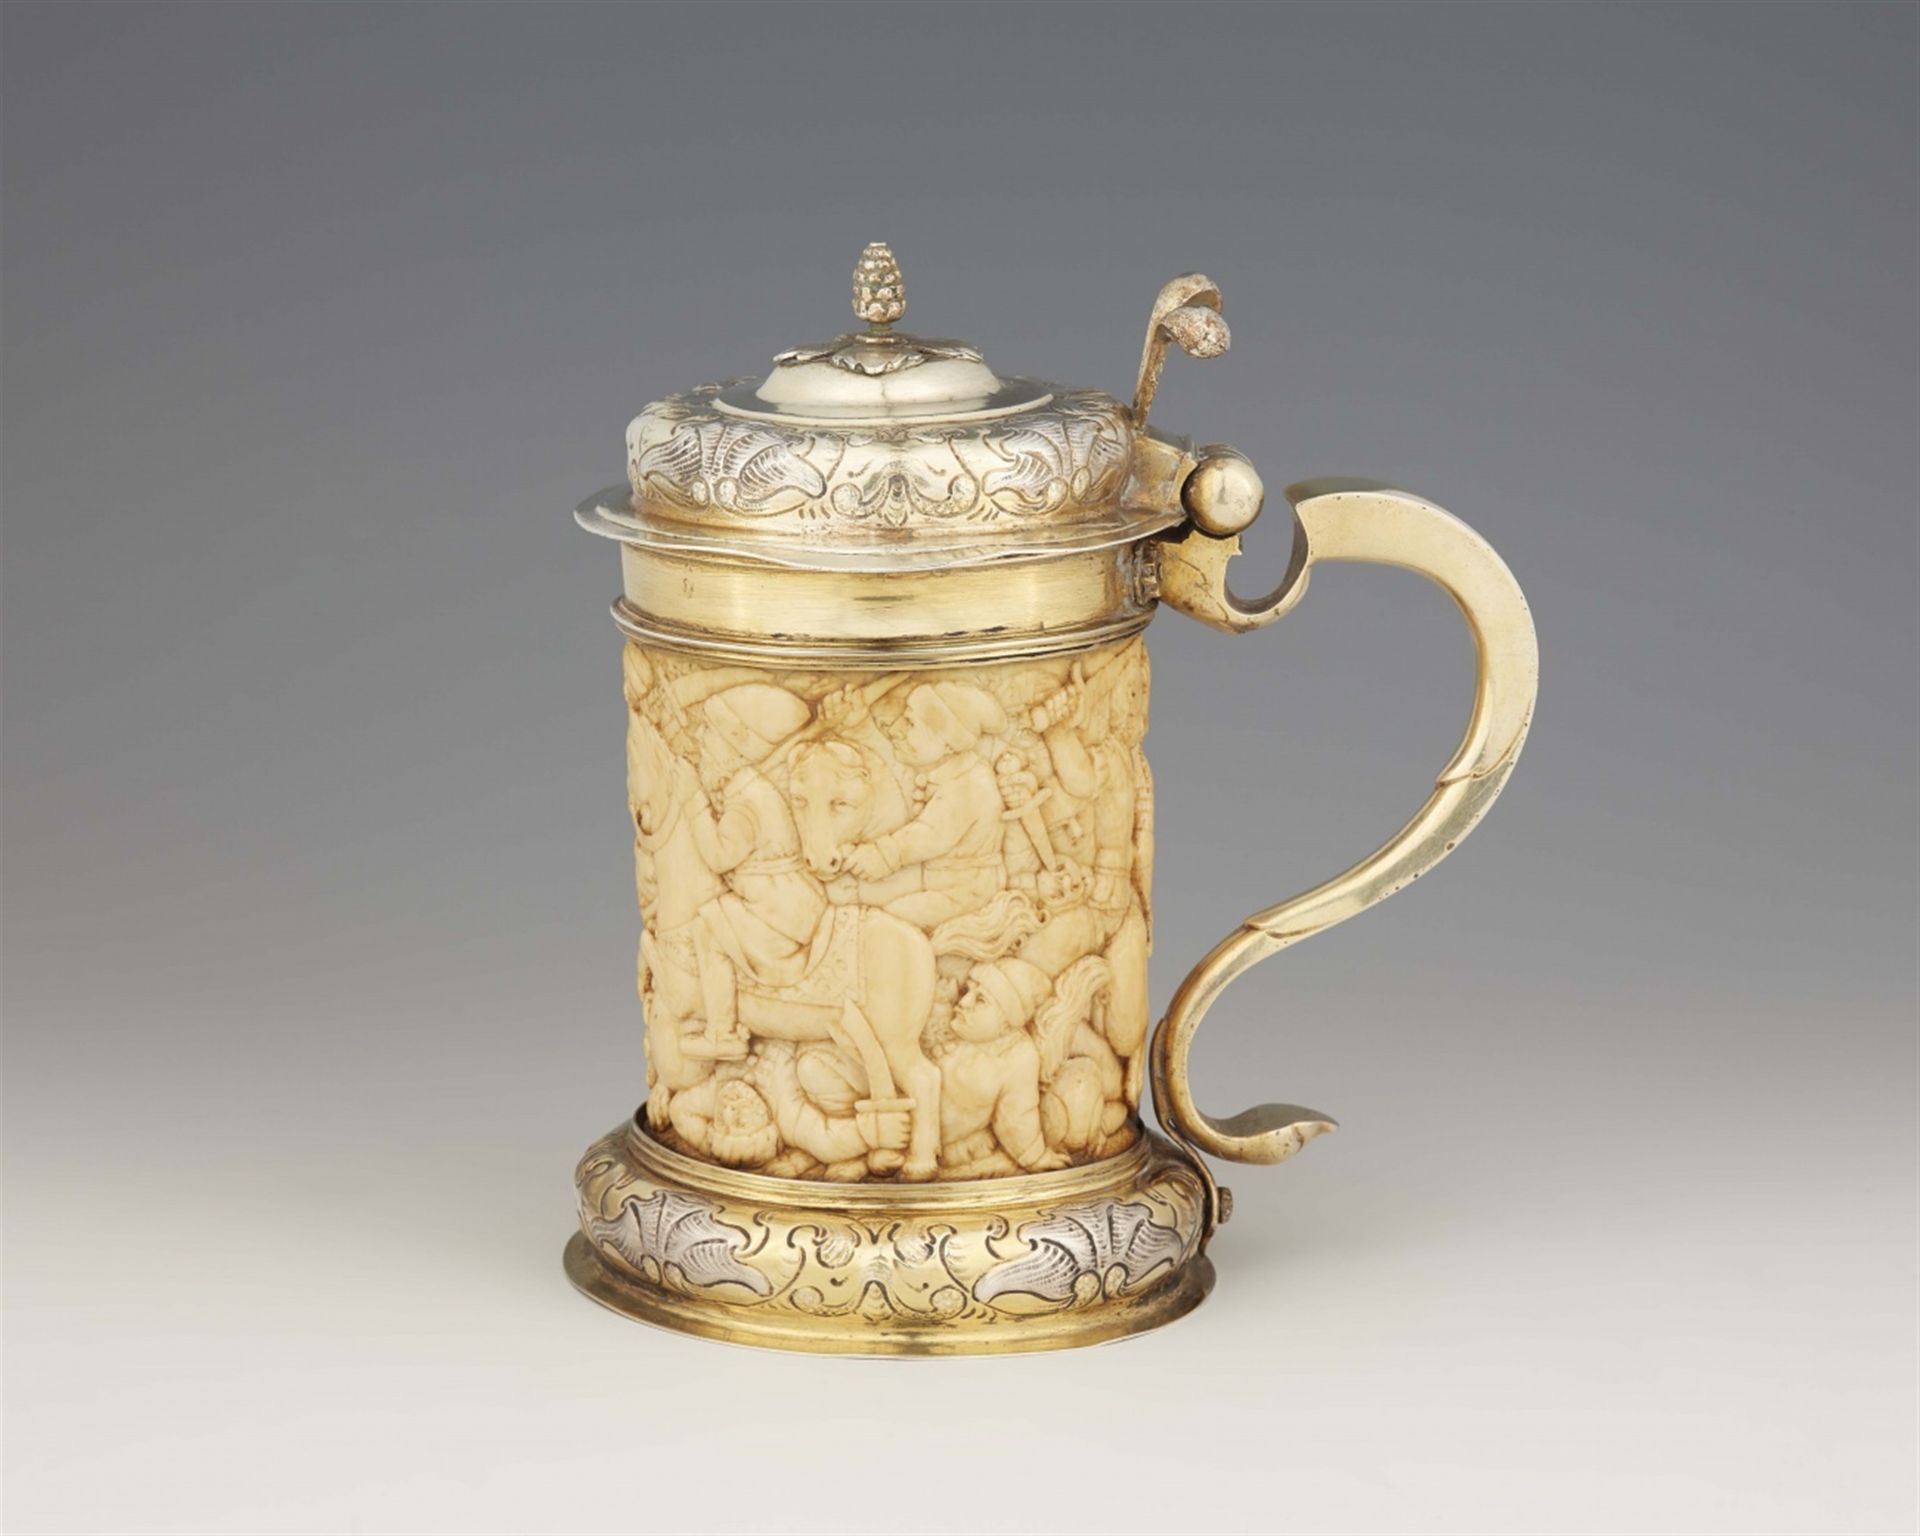 A silver mounted ivory tankard